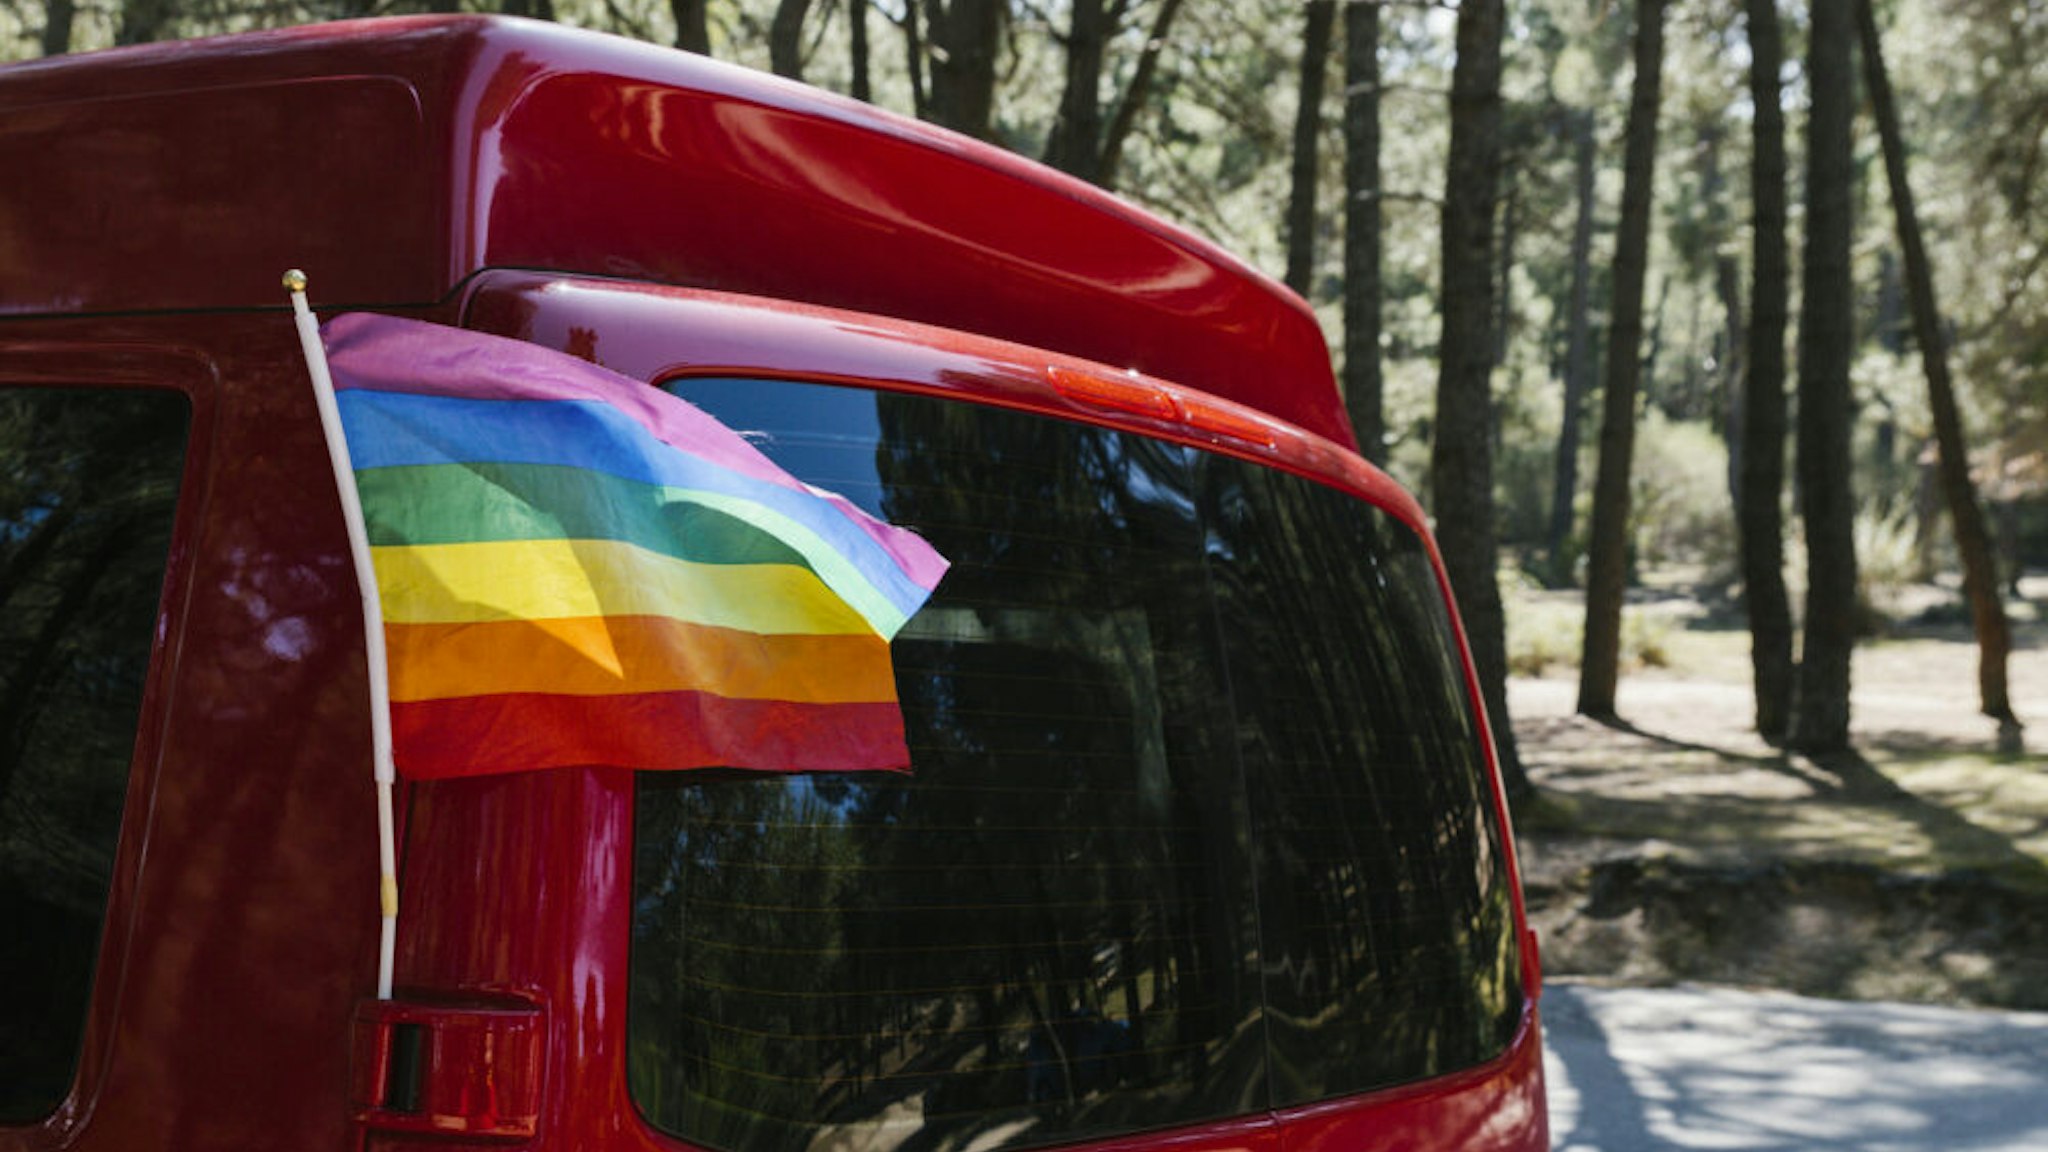 Campervan with an LGBT pride flag - Stock photo